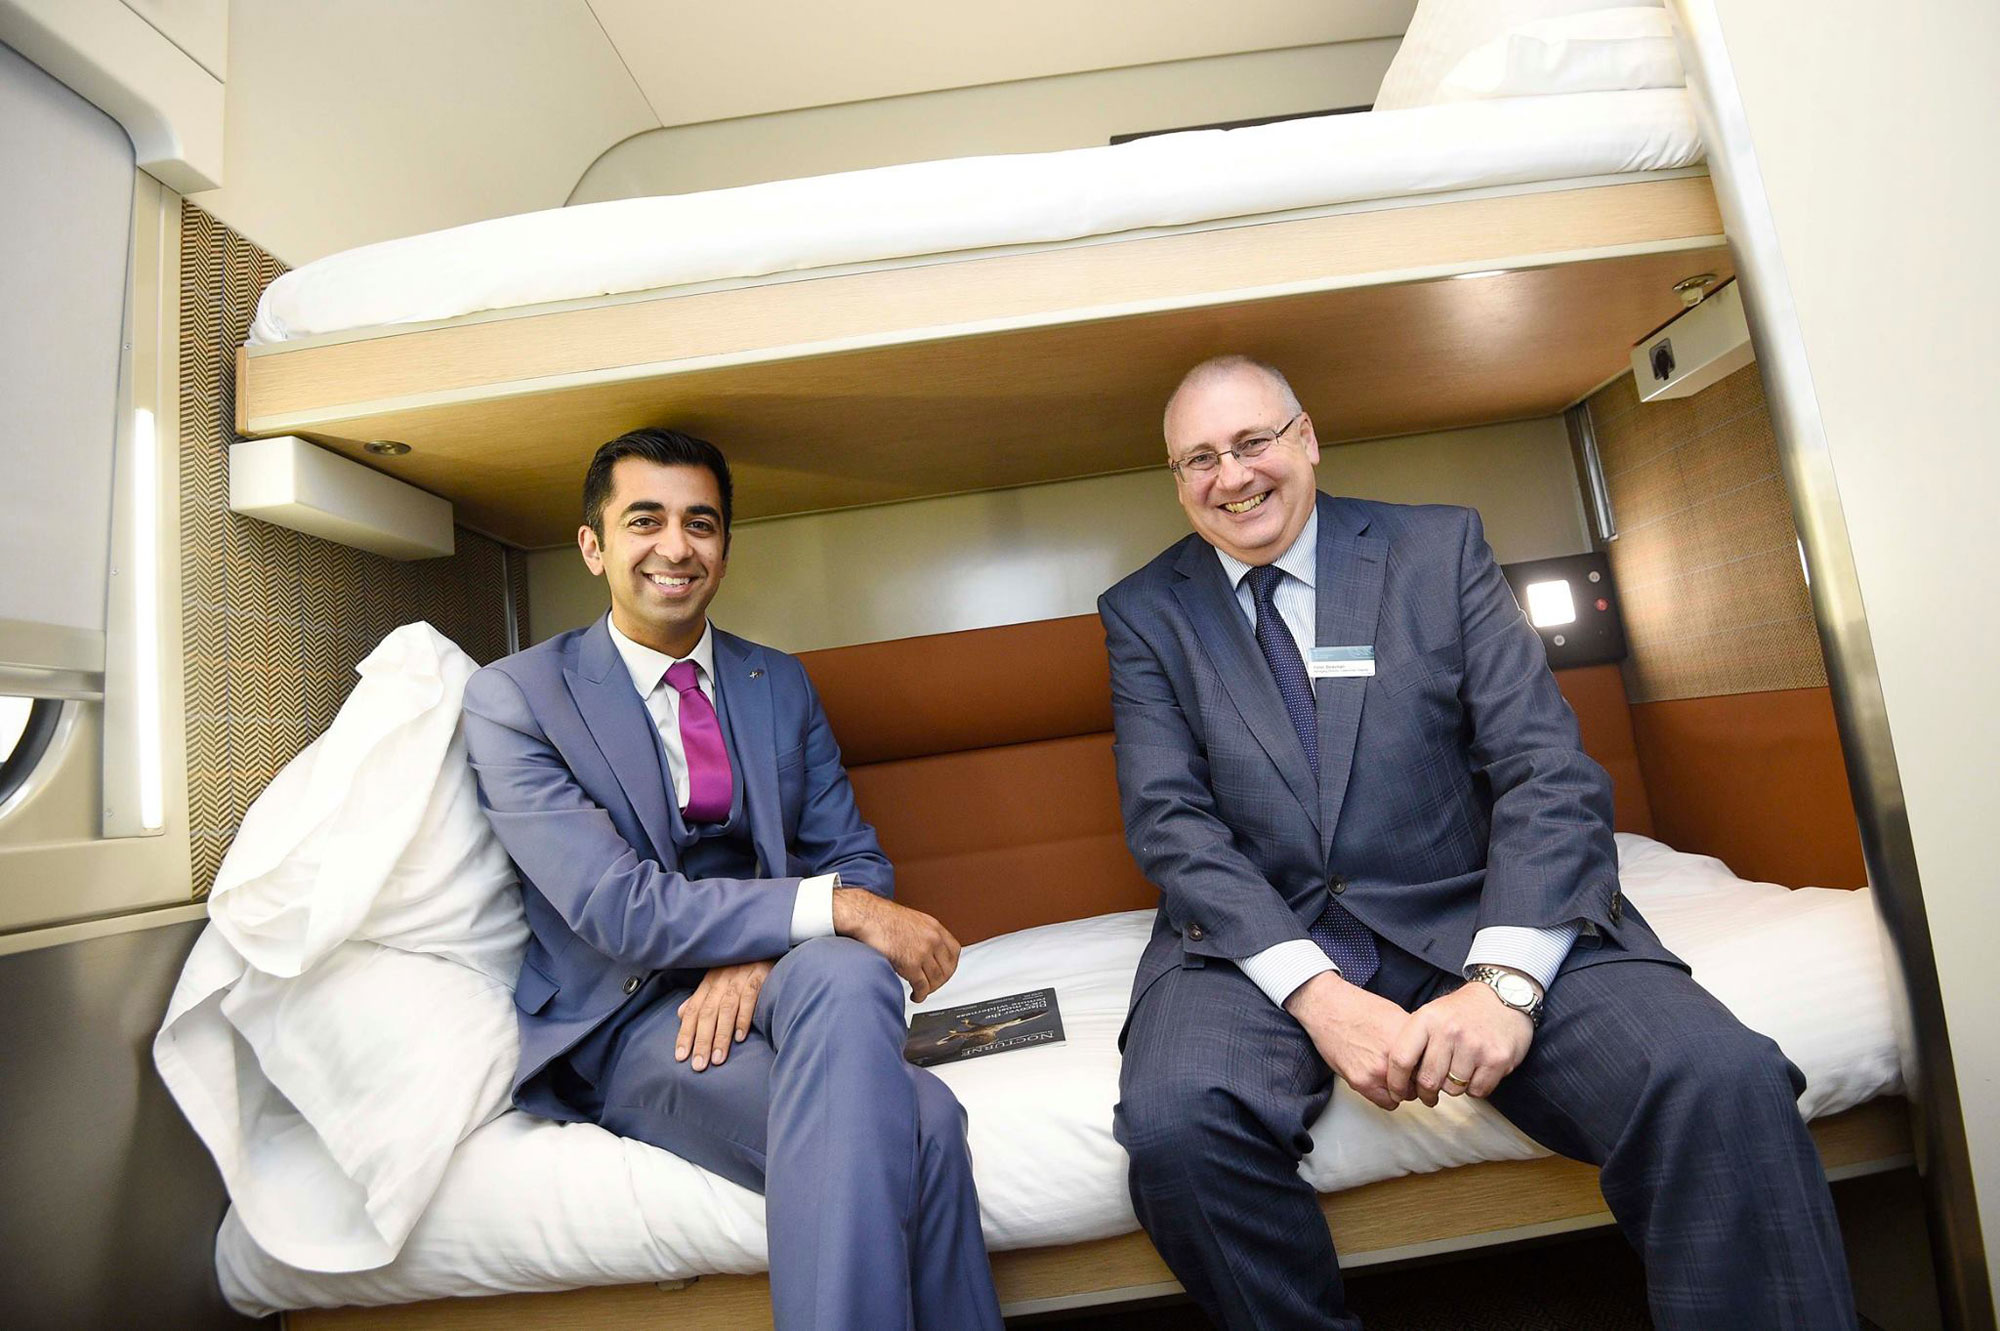 Scotland’s Transport Minister Humza Yousaf MSP (l) and Peter Strachan, Managing Director (r) - Copyright Caledonian Sleeper / Serco / CAF